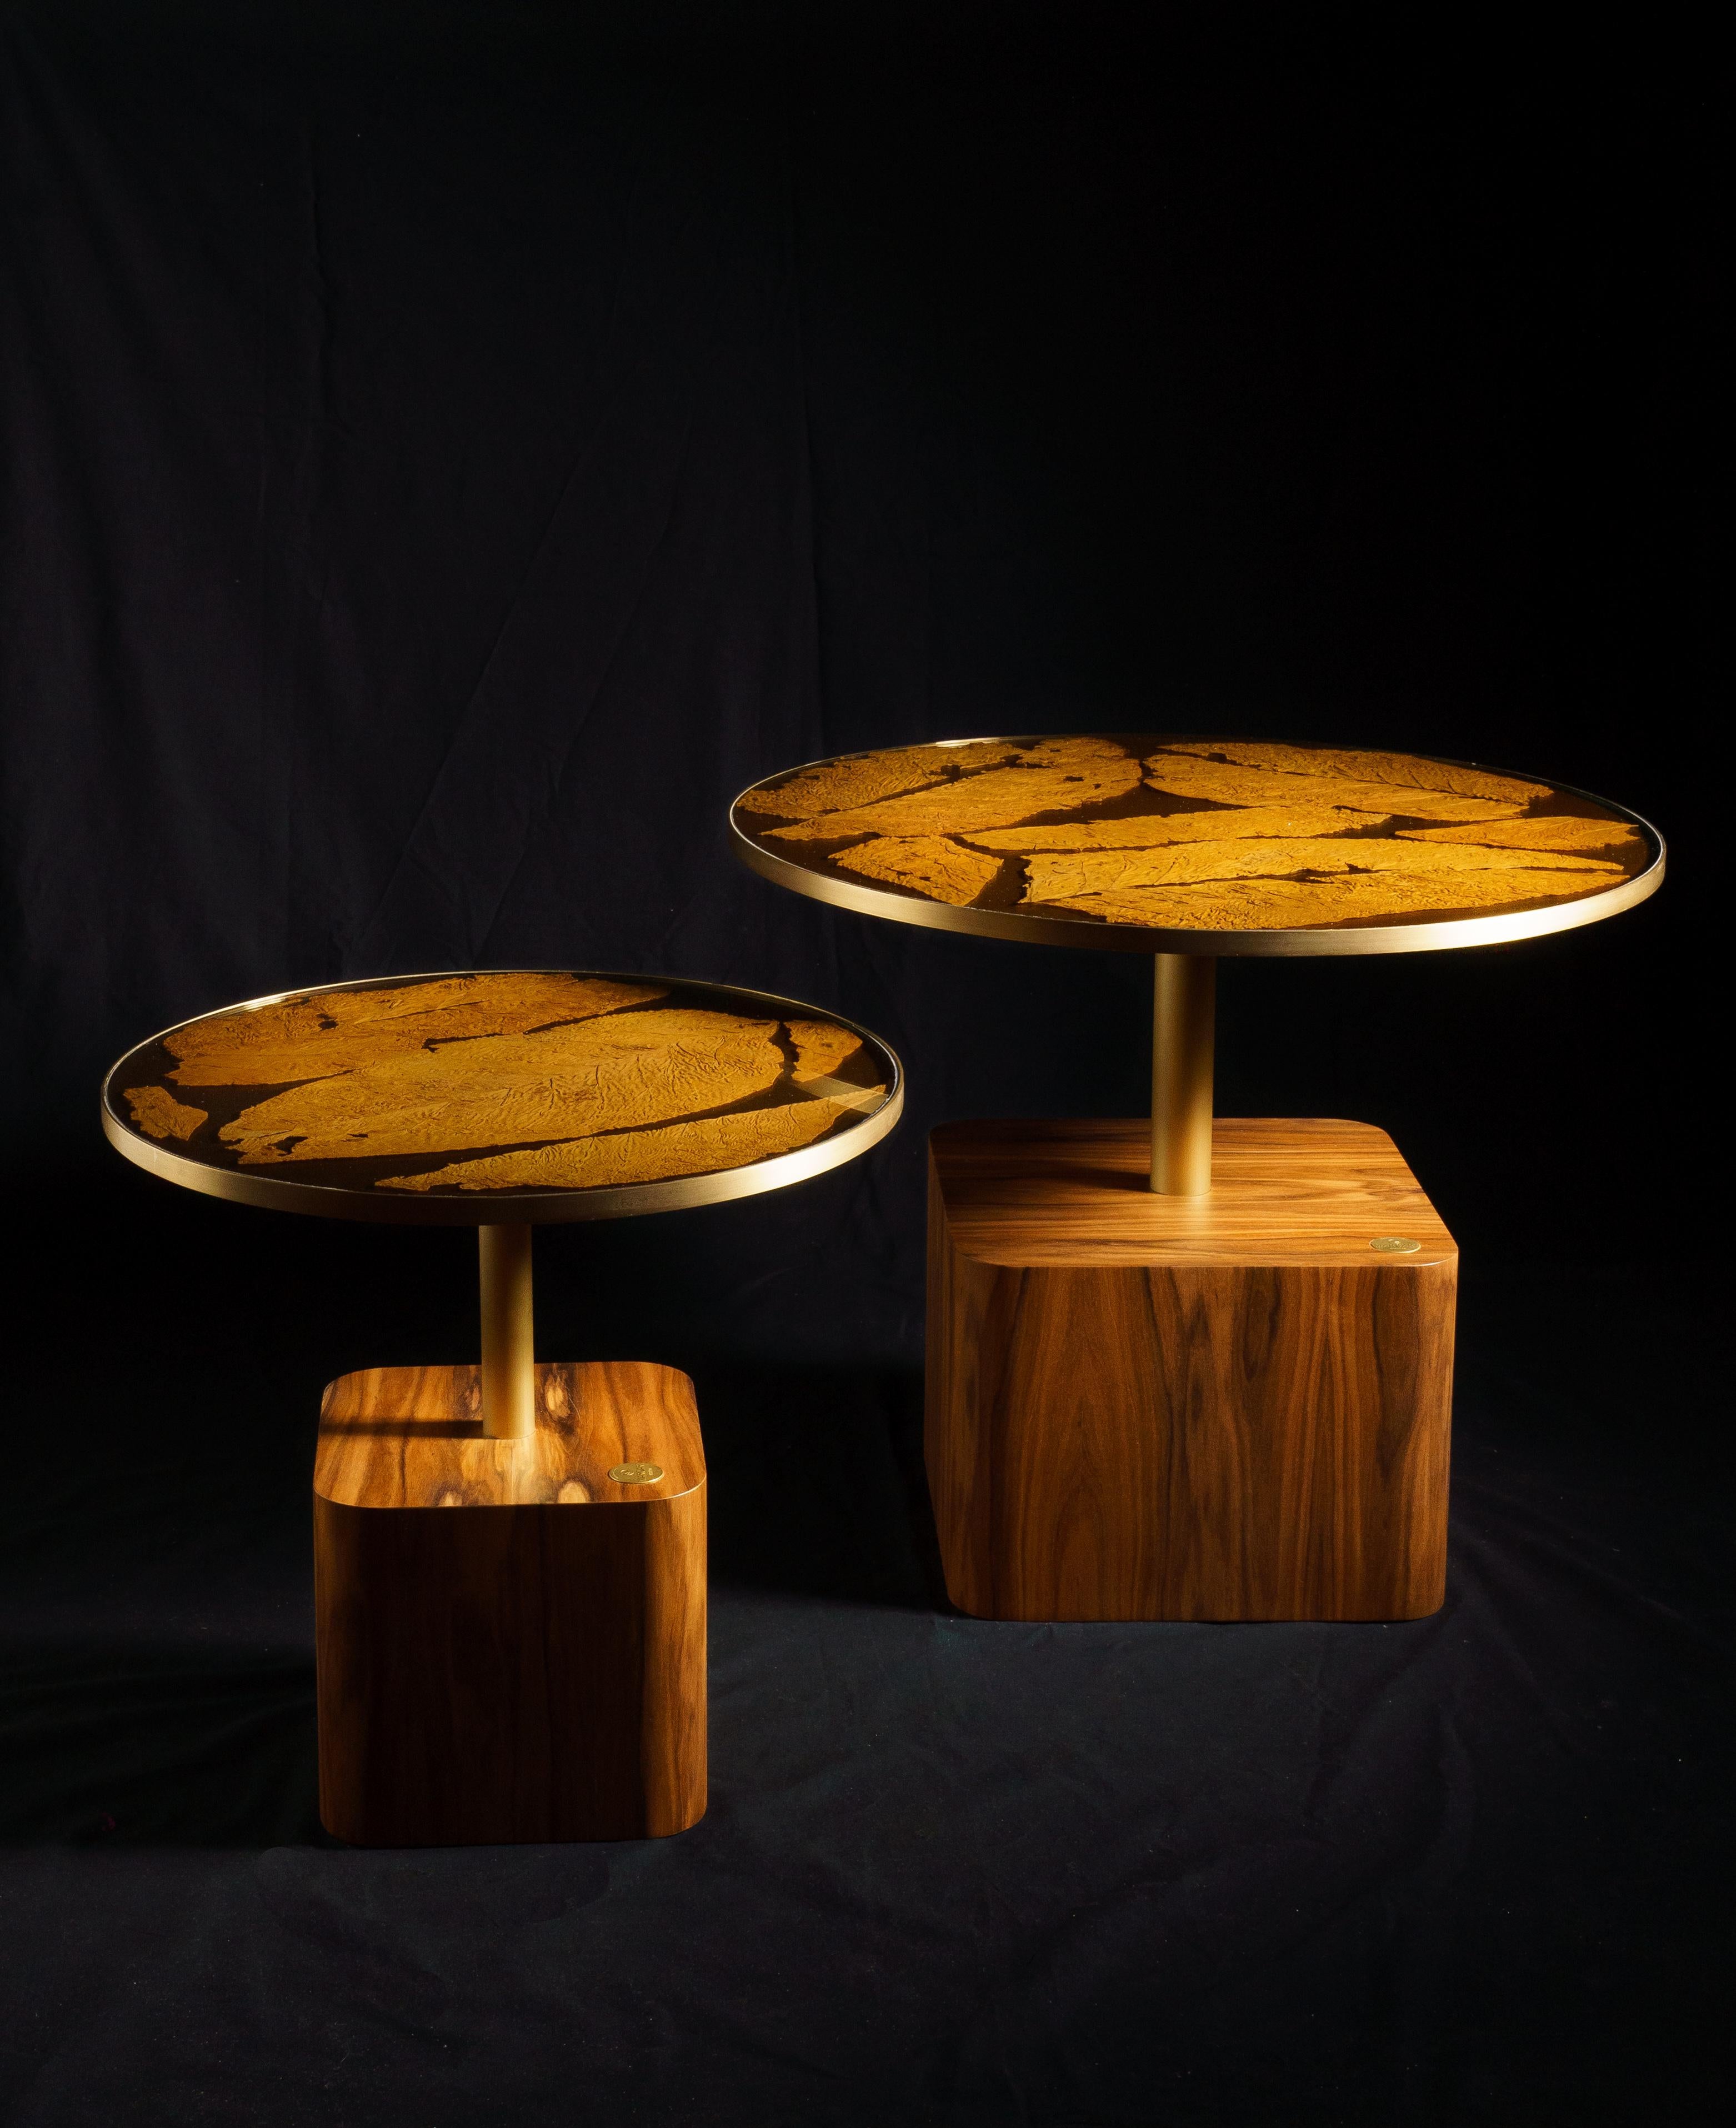 For cigar lovers and more, Margart has created a timeless coffee table. 
A new icon of luxury bio design, and a tribute to the ancient Italian tradition of growing tobacco leaves for the production of Tuscan cigars called 'toscanelli'.
The table is